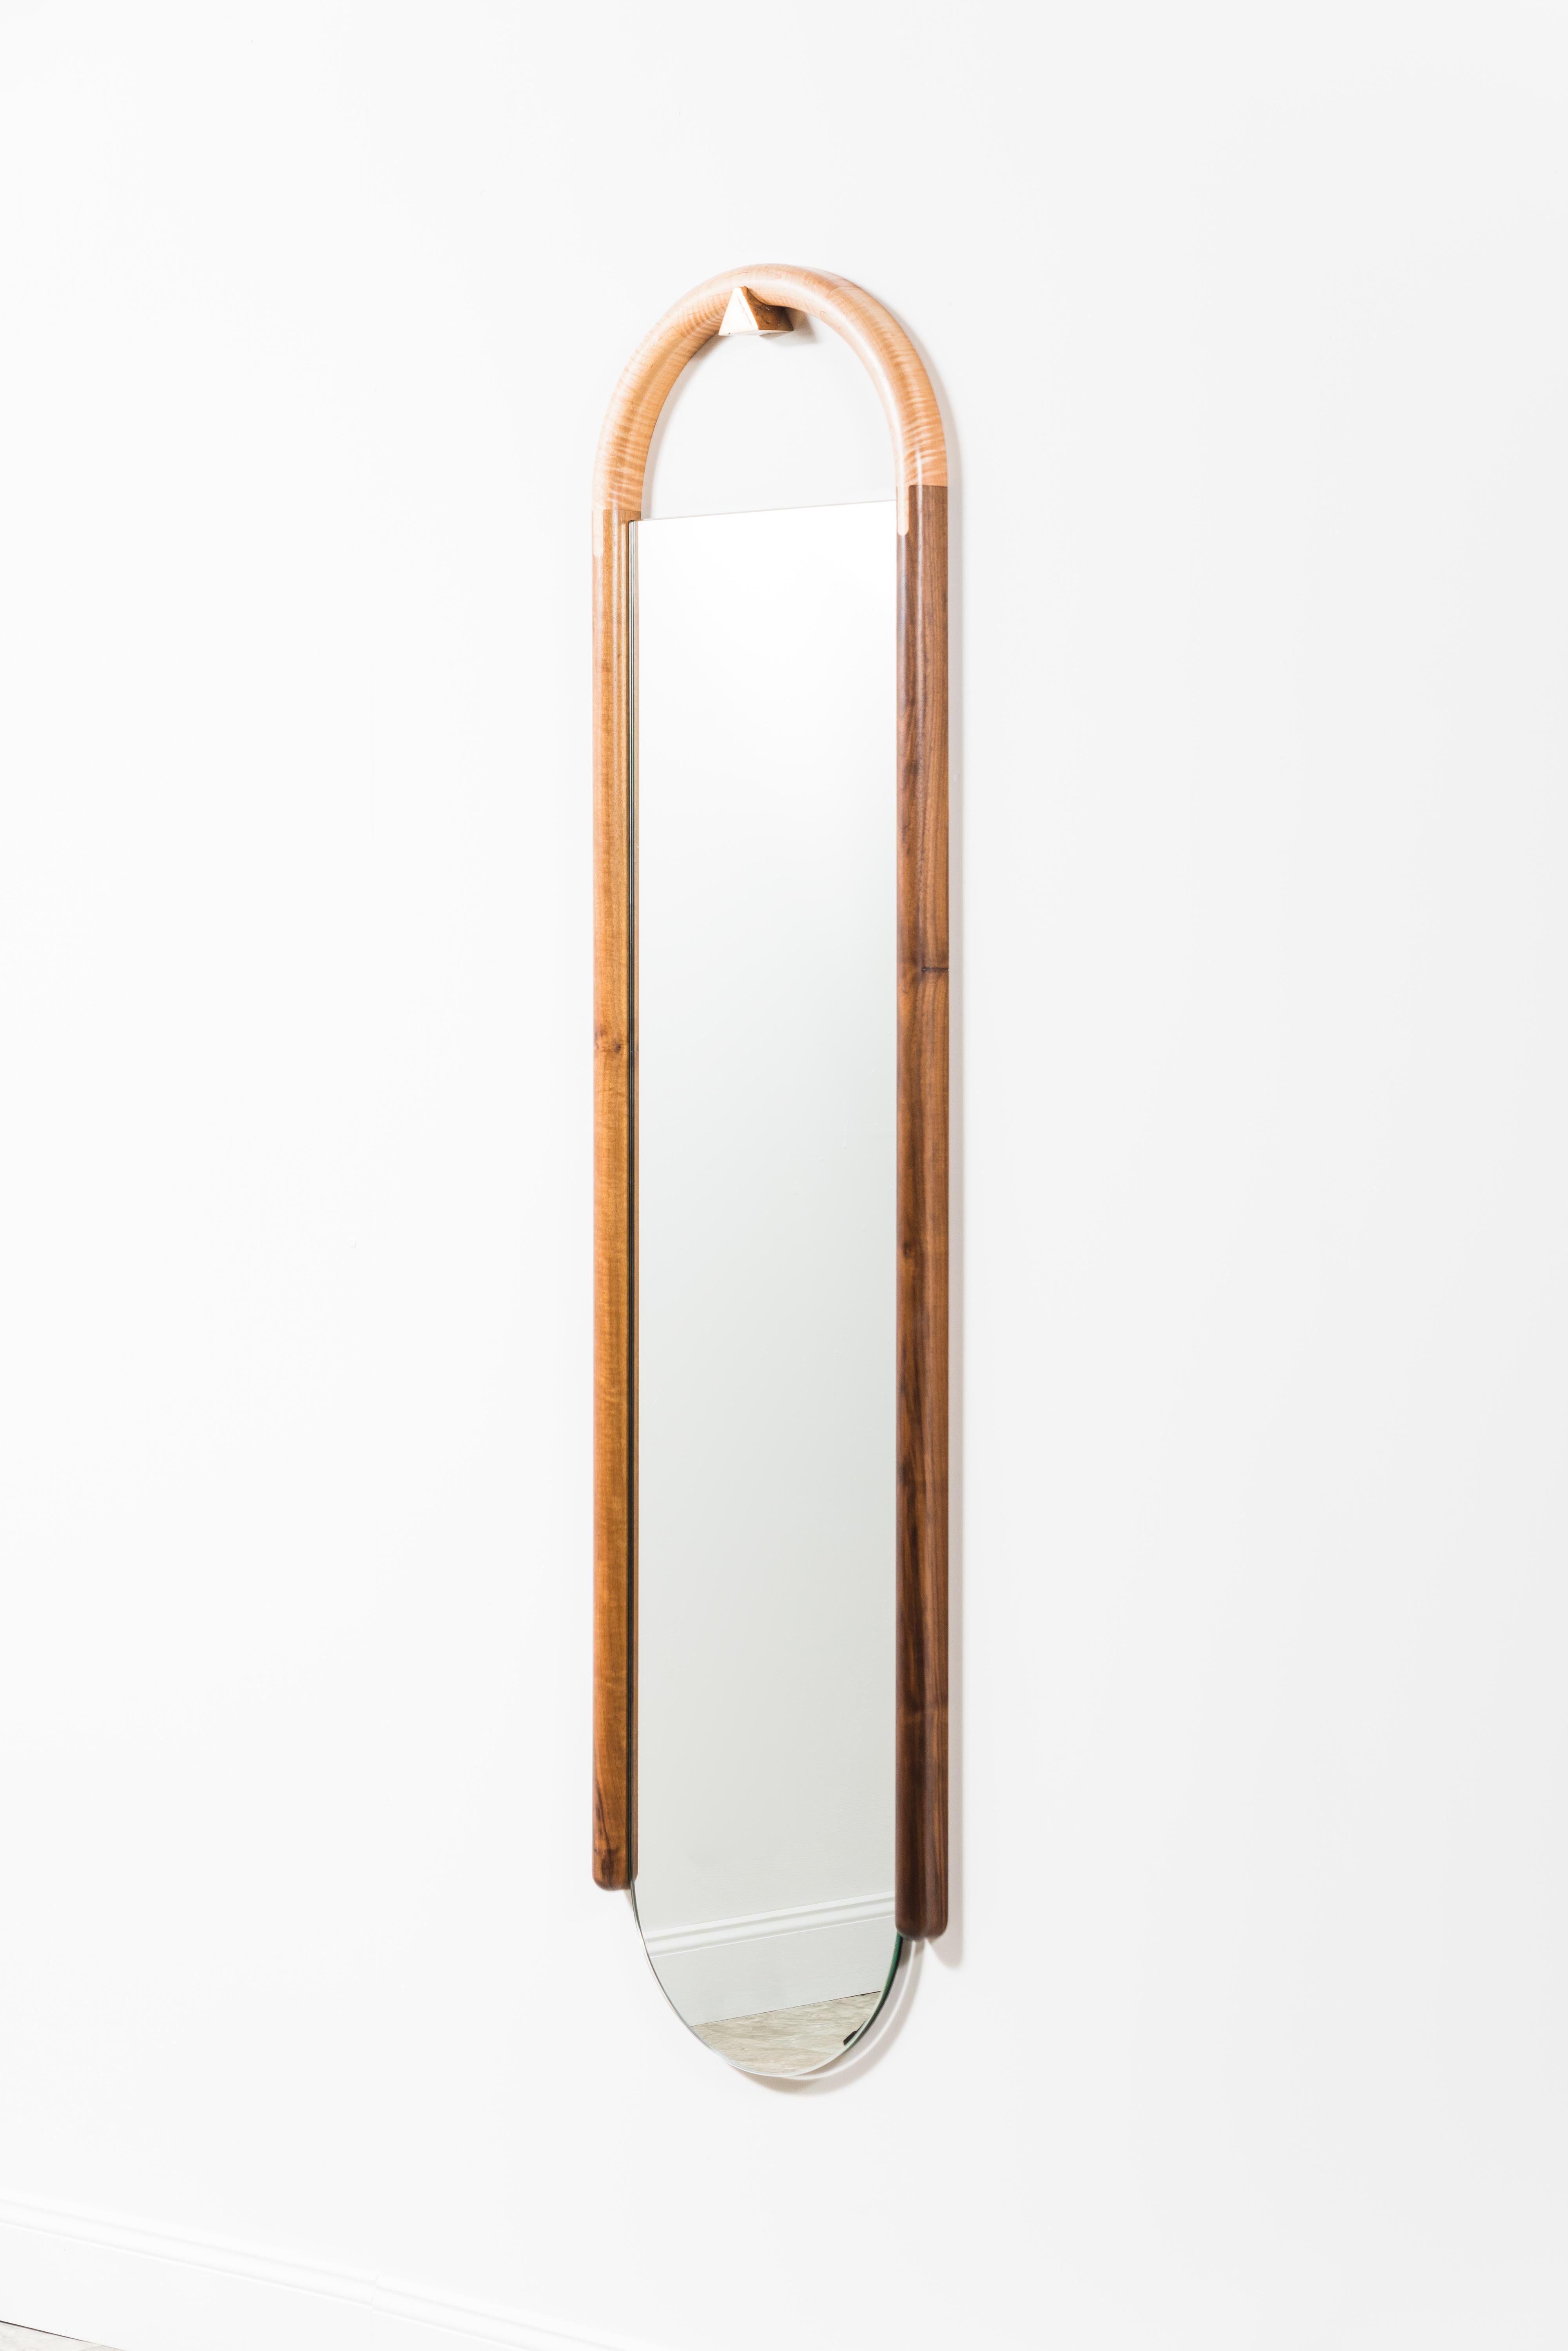 Halo Mirror Wall Mounted Birnam Wood Studio in Cherry and Curly Maple For Sale 2